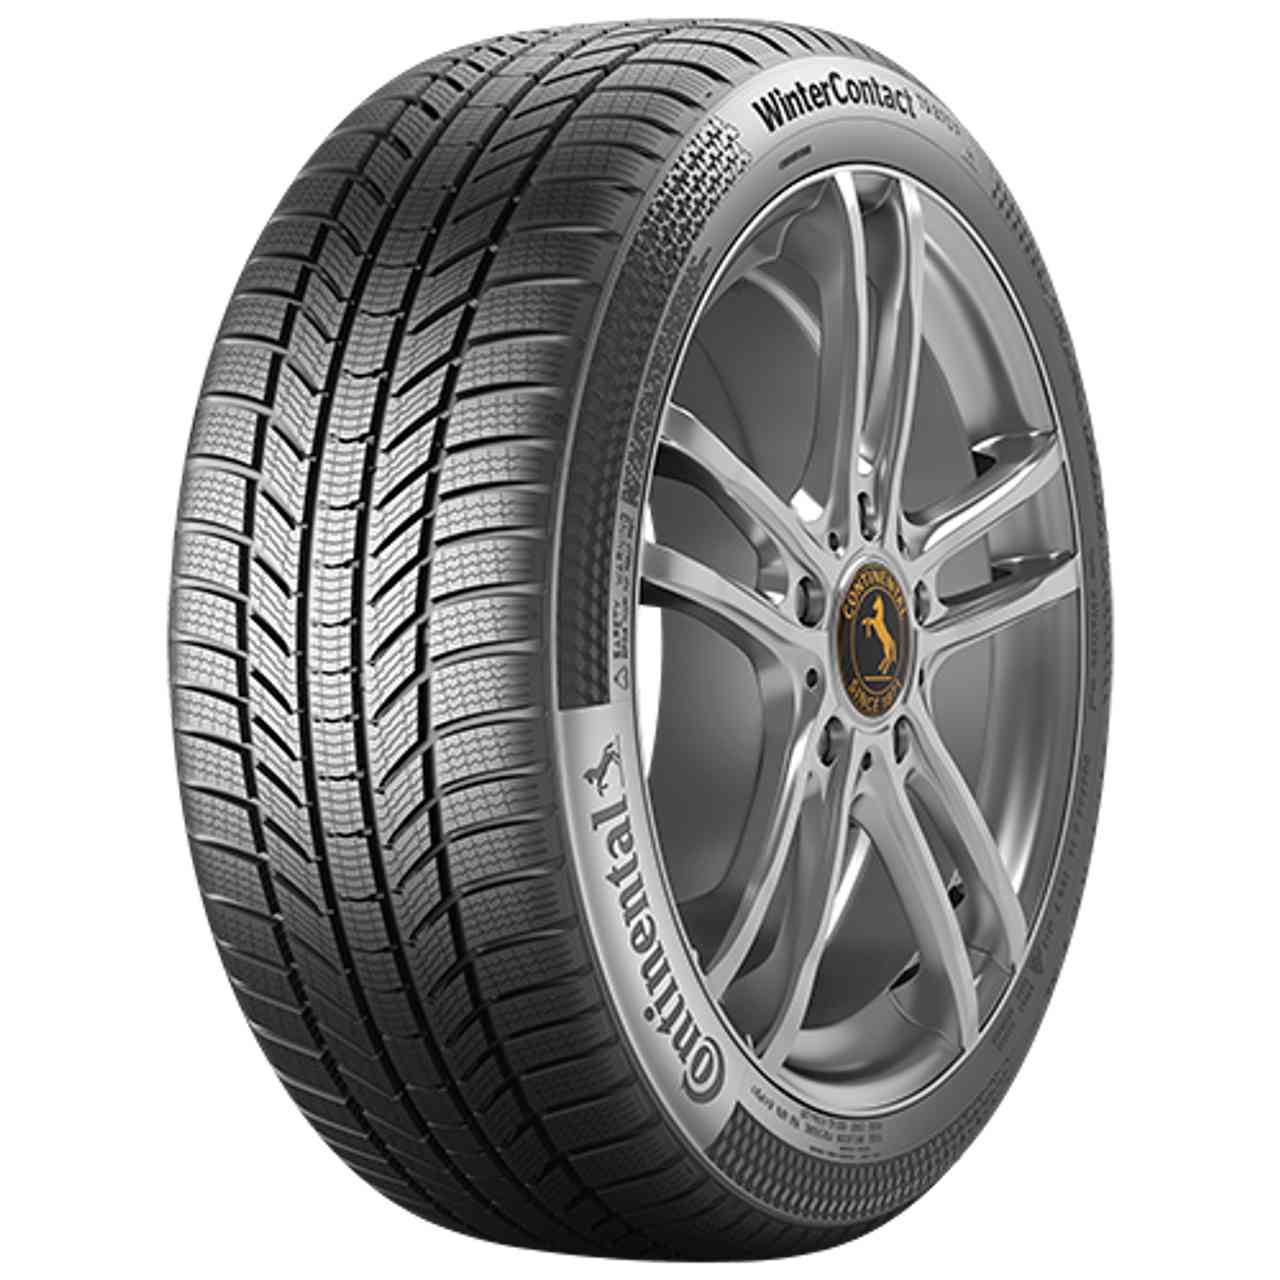 CONTINENTAL WINTERCONTACT TS 870 P (EVc) 235/55R19 101T FR BSW